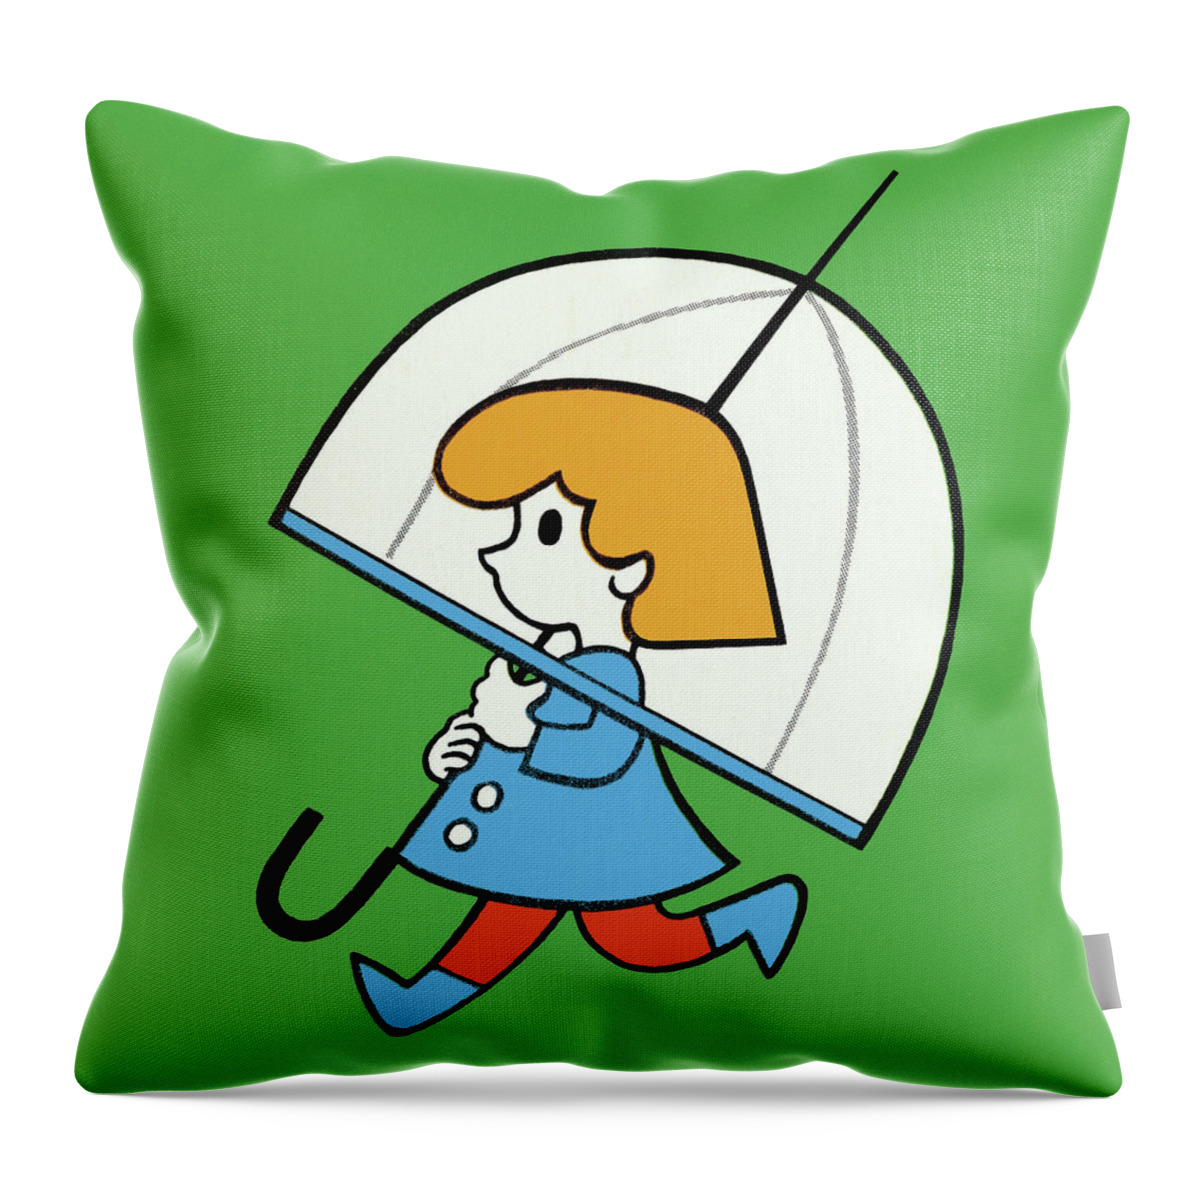 Apparel Throw Pillow featuring the drawing Child Walking With an Umbrella by CSA Images